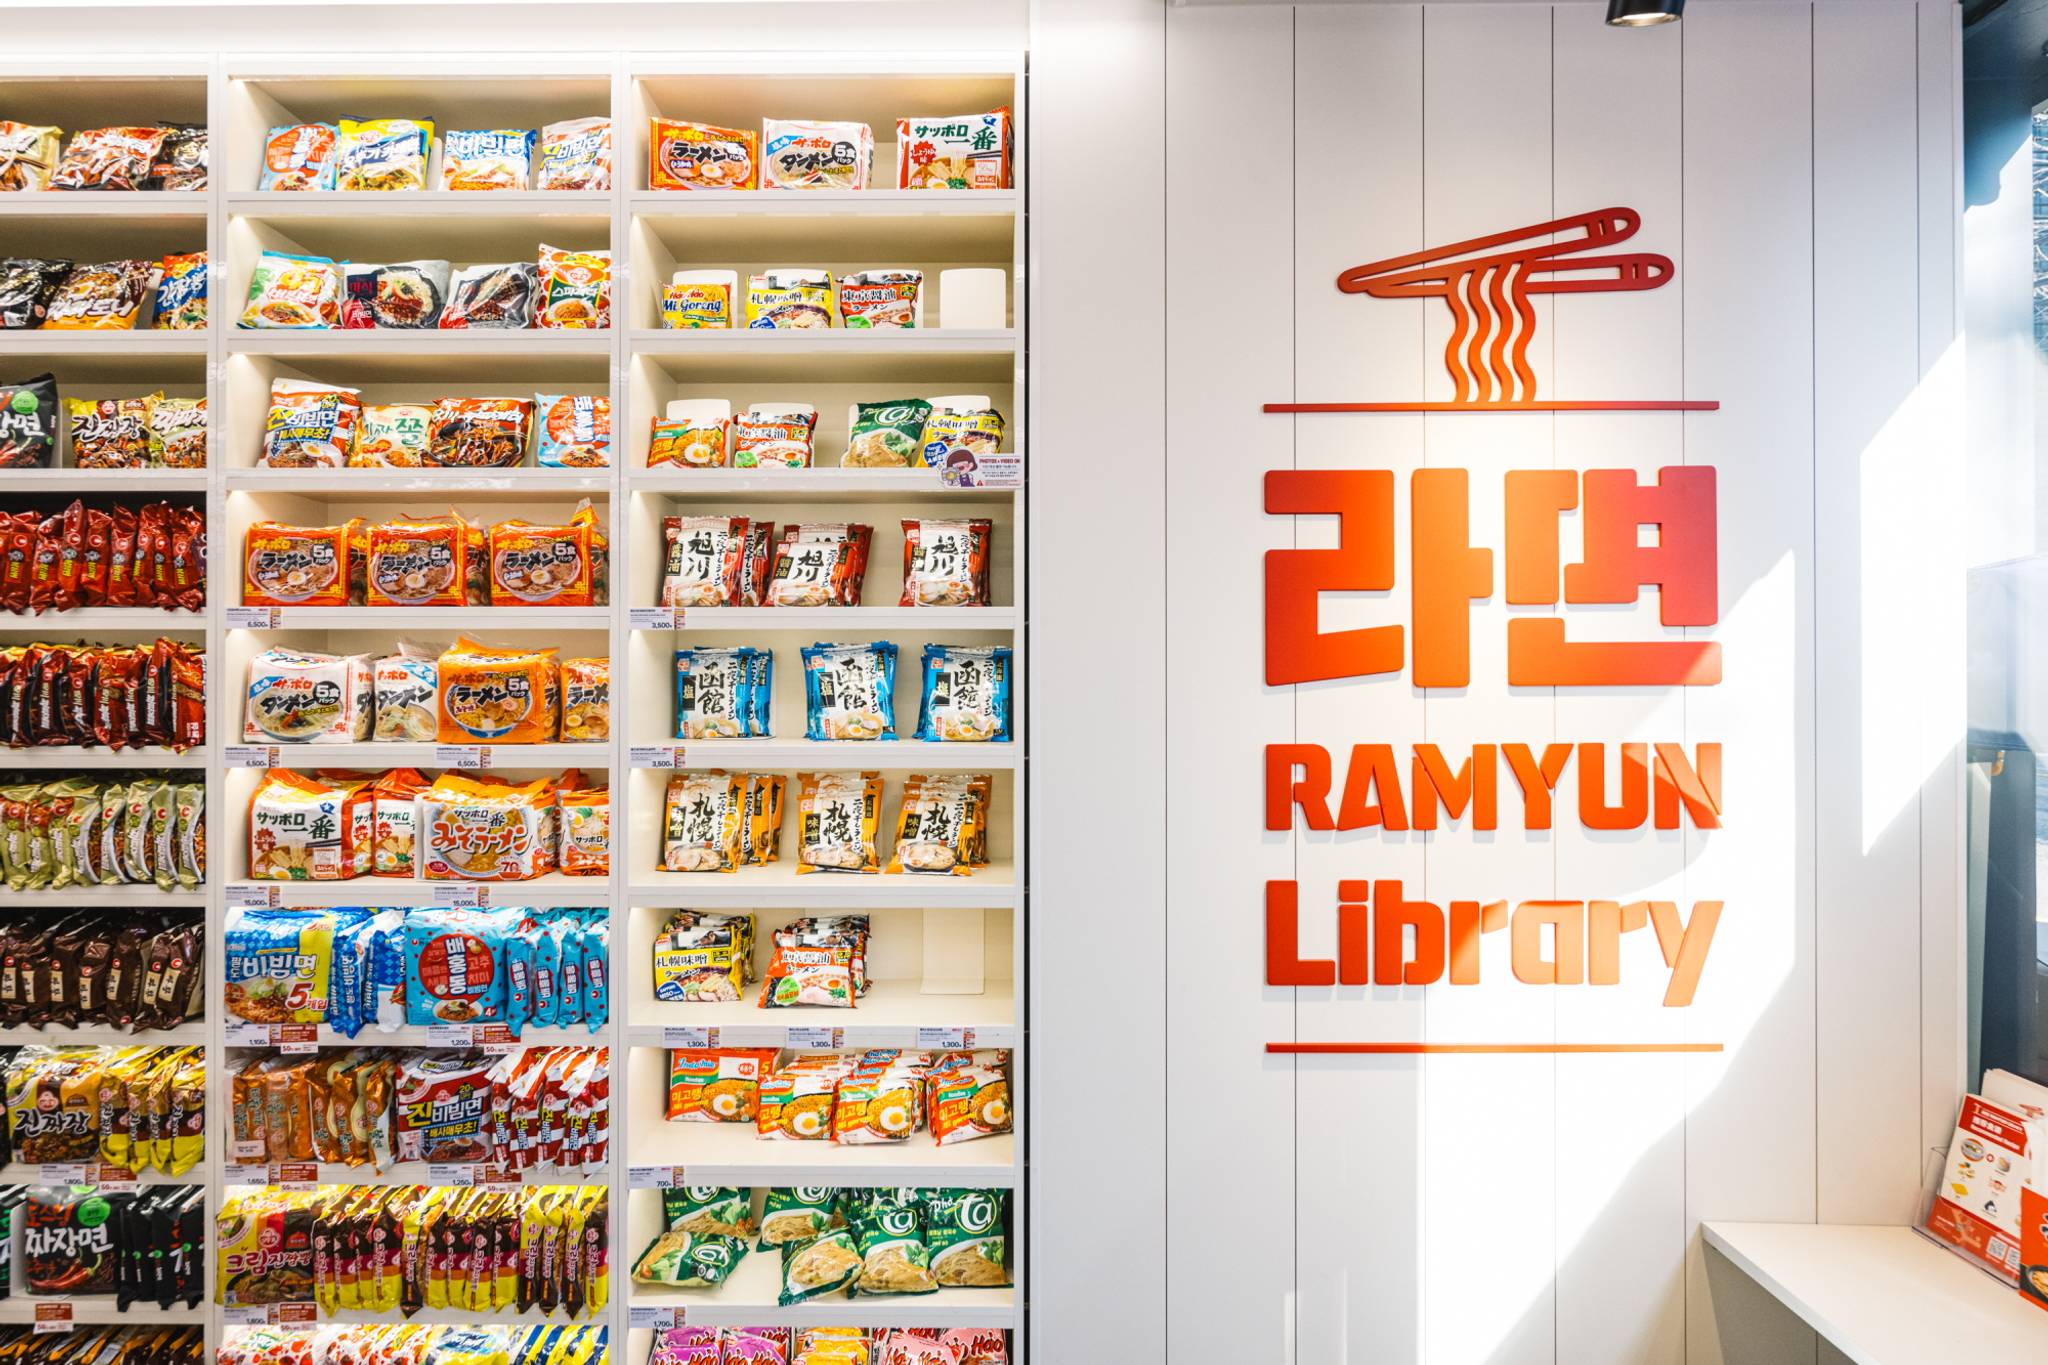 How Ramyun Library warms up tourists in Korean convenience stores